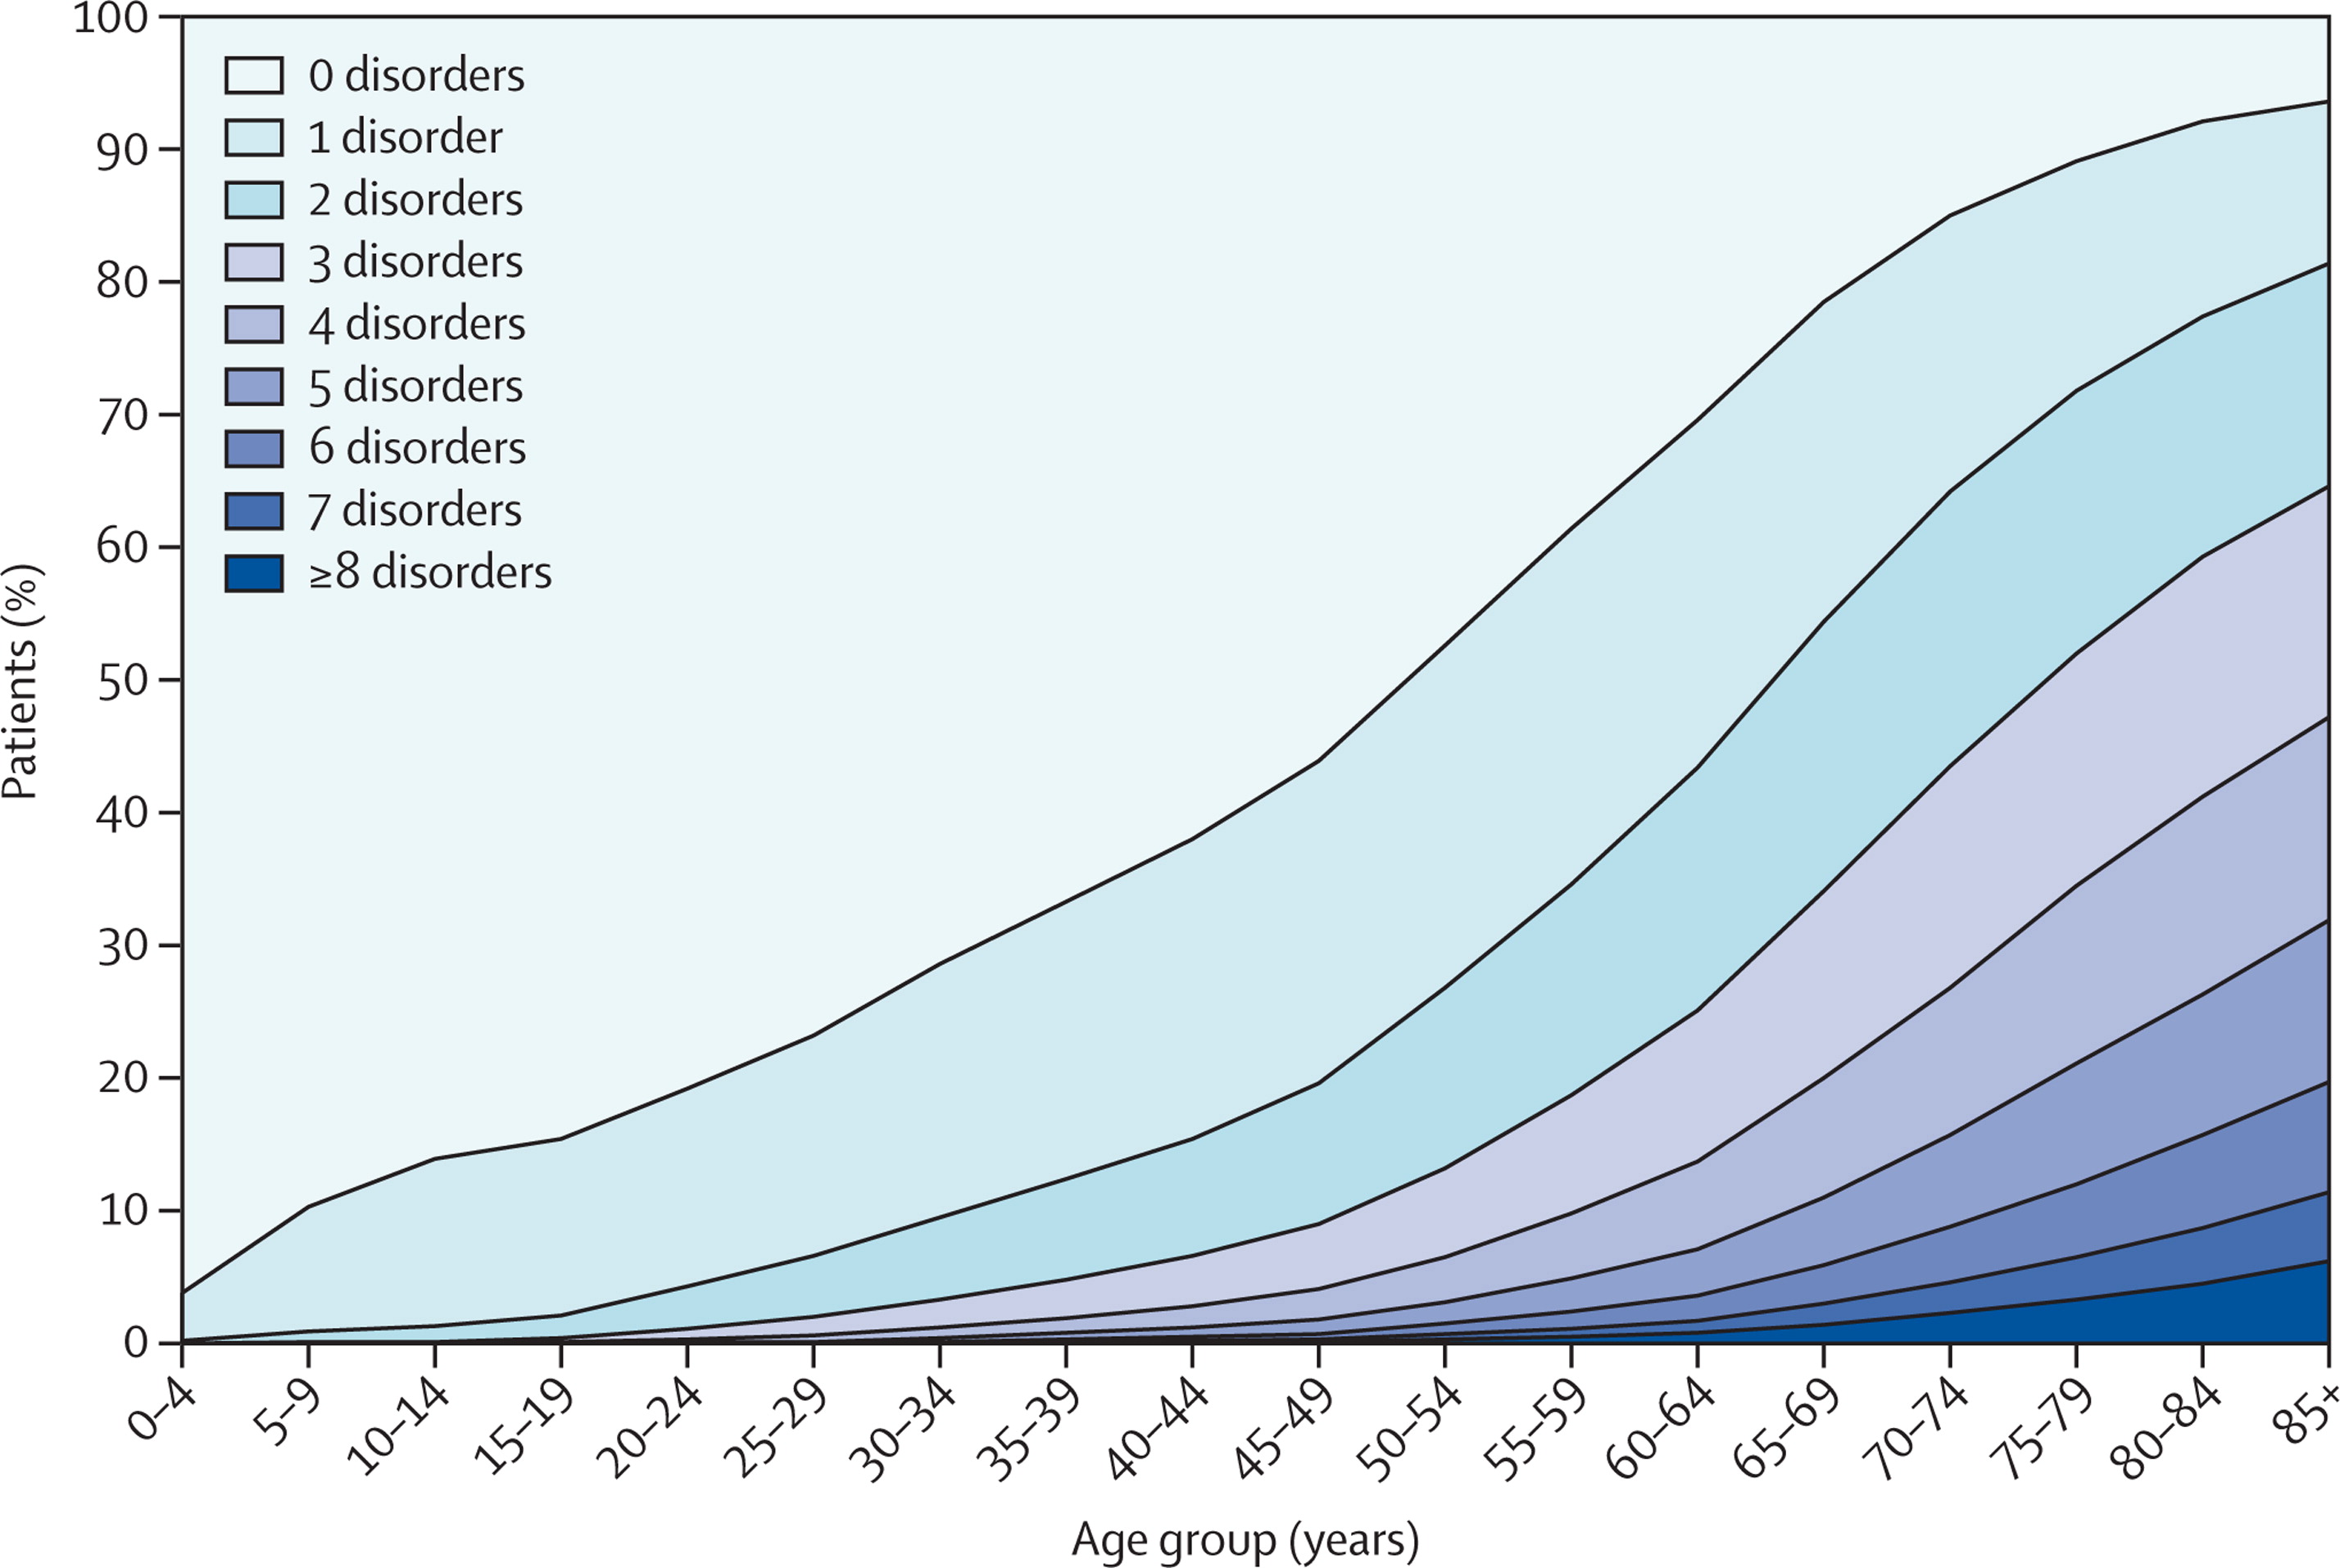 Number and Frequency of Comorbidities increase with Age Number of chronic disorders by age group. reproduced from Barnett et al. 2012 figure 1 [6].